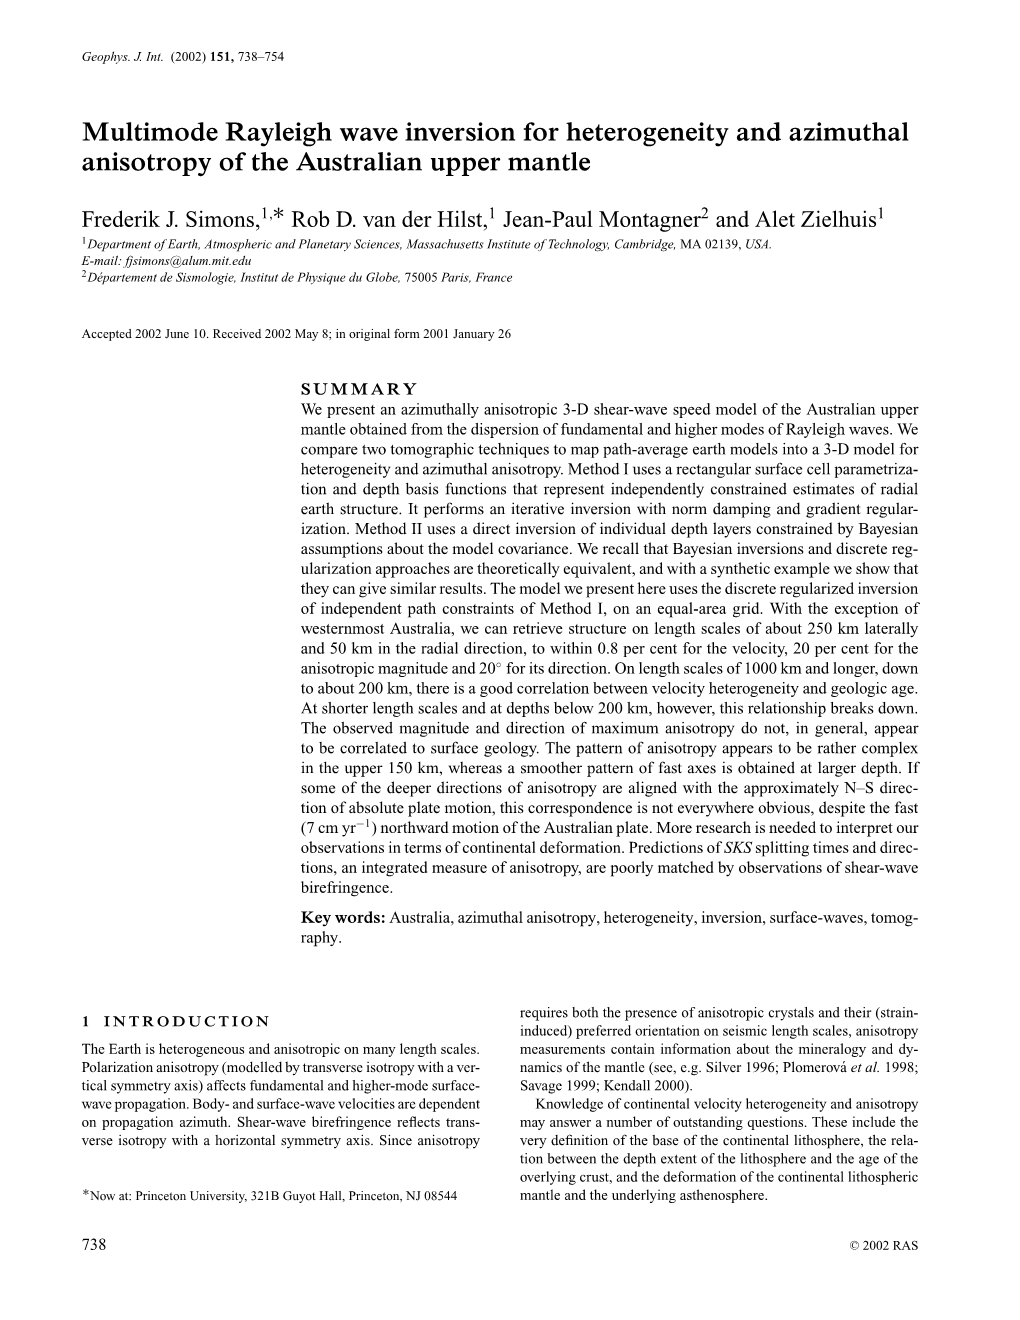 Multimode Rayleigh Wave Inversion for Heterogeneity and Azimuthal Anisotropy of the Australian Upper Mantle ∗ Frederik J